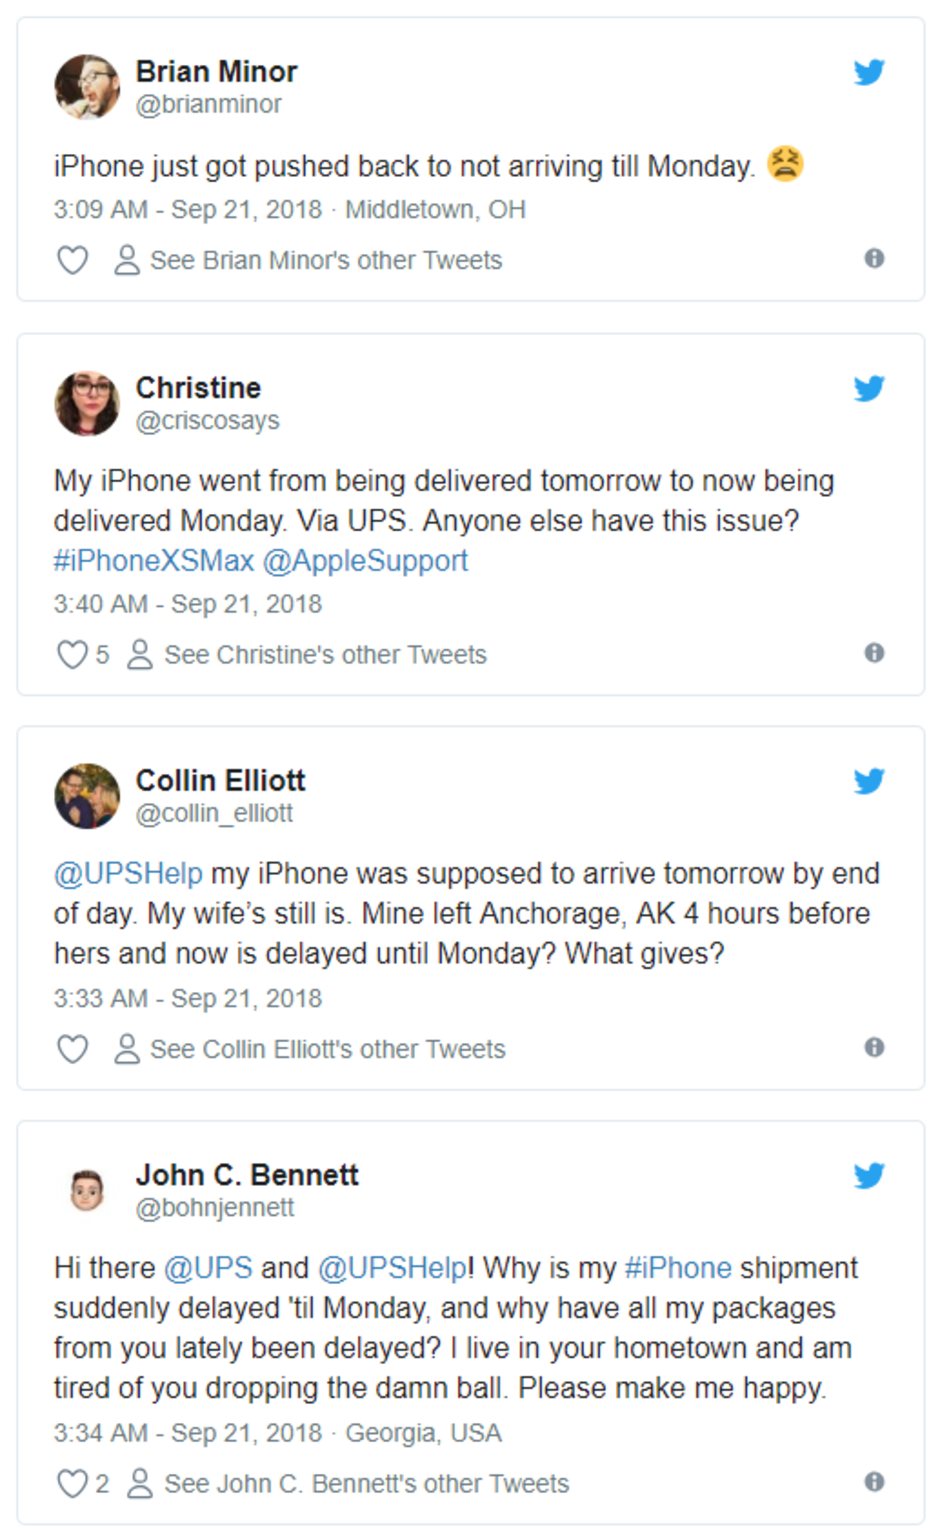 Has your iPhone XS, XS Max or Apple Watch pre-order shipment been delayed?